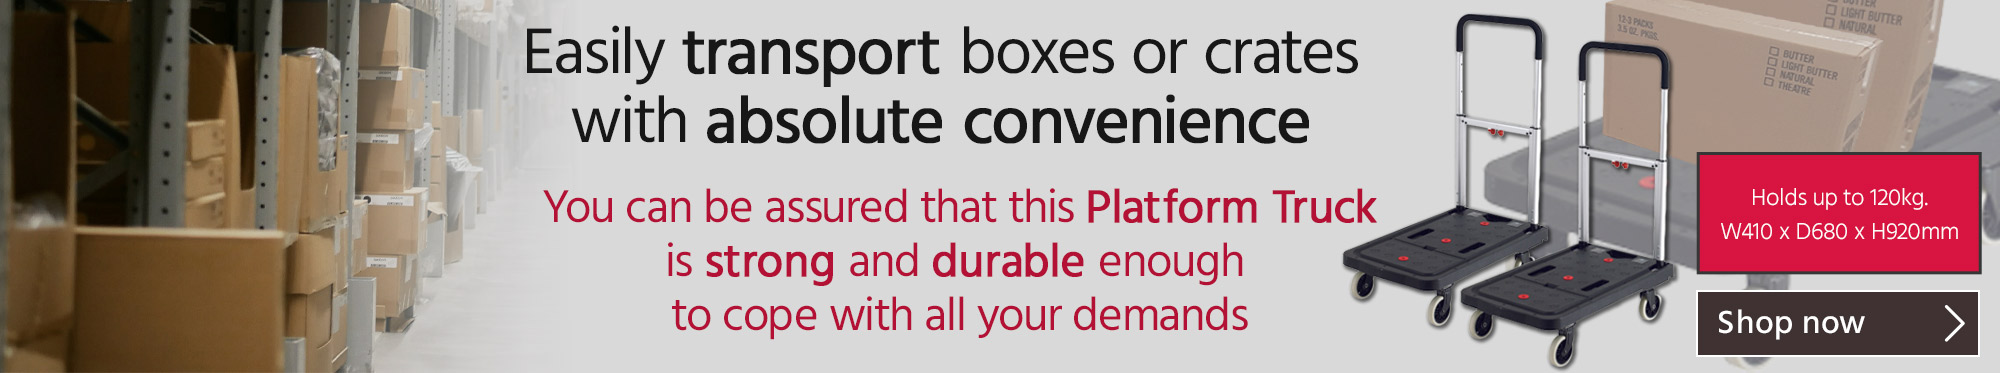 Easily Transport Boxes and Crates with Absolute Convenience